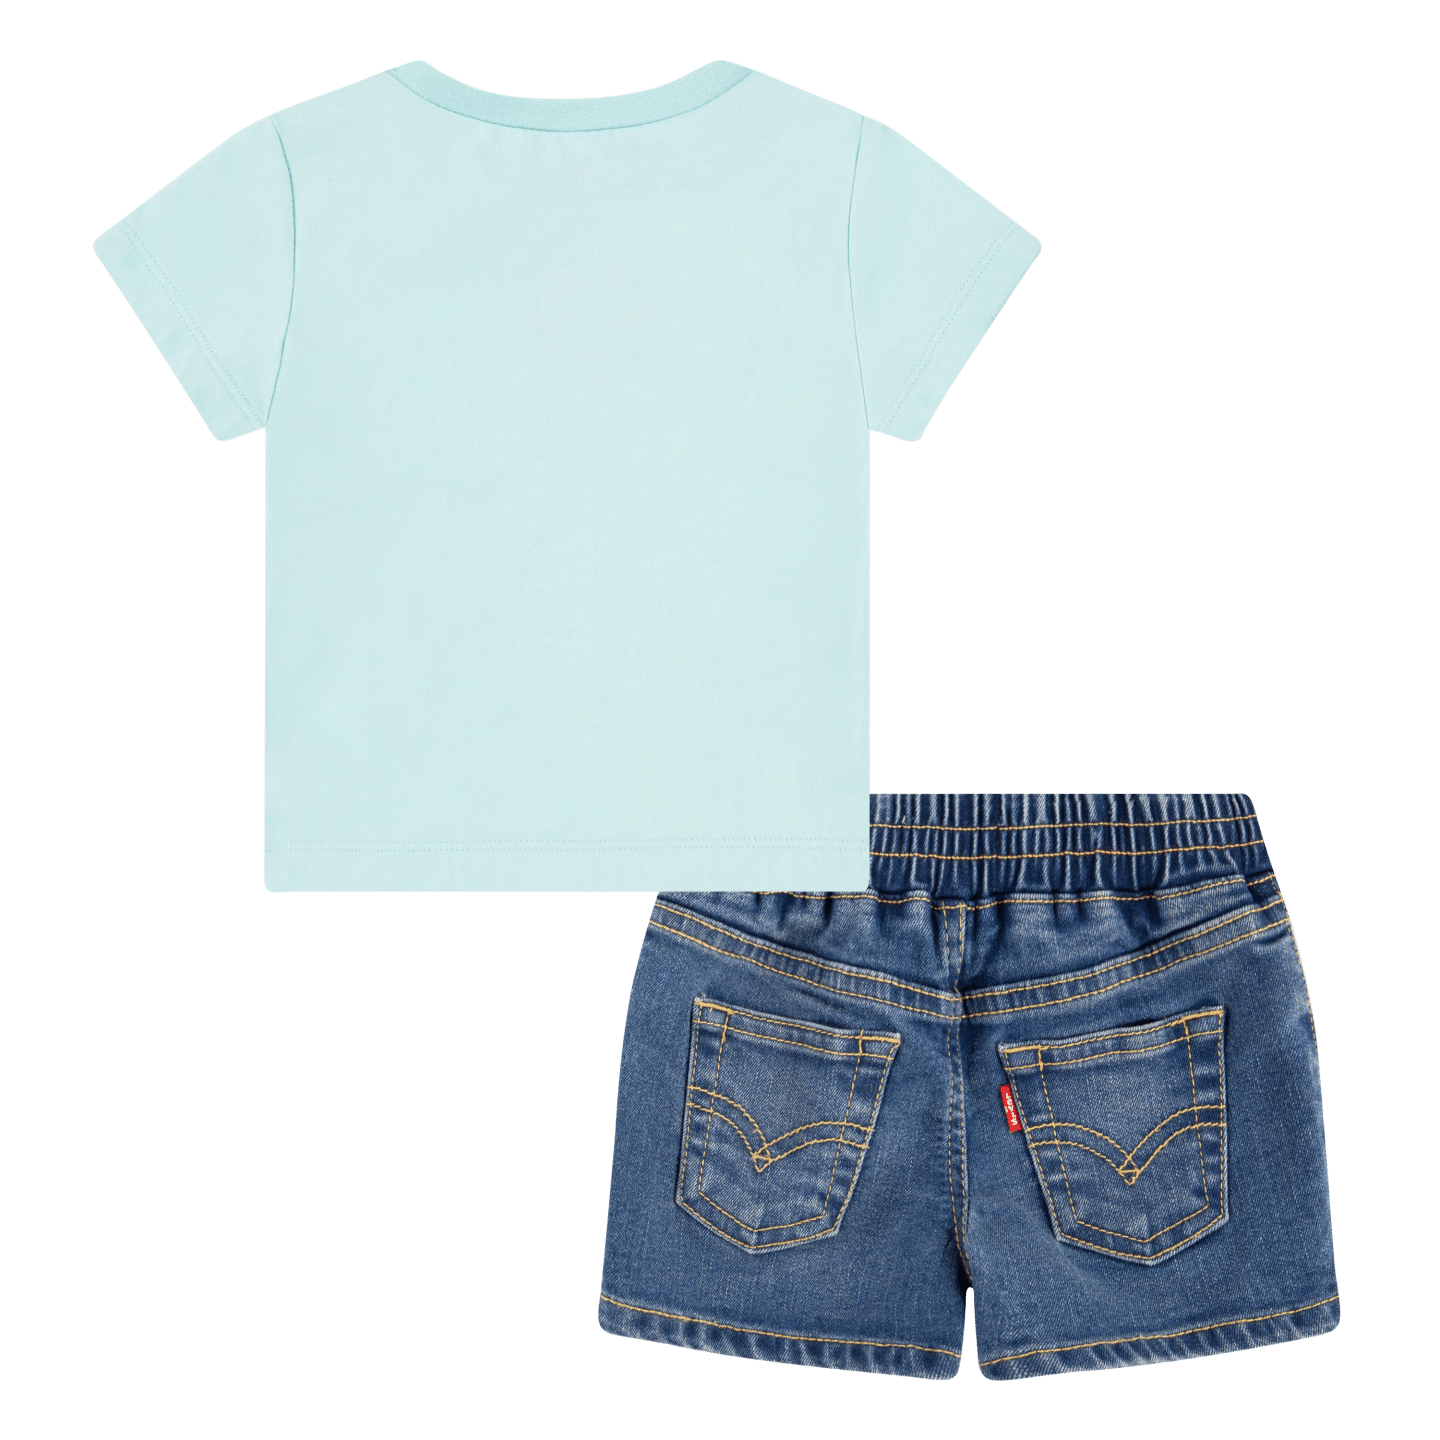 Levi's girls denim shorts and tee set back view